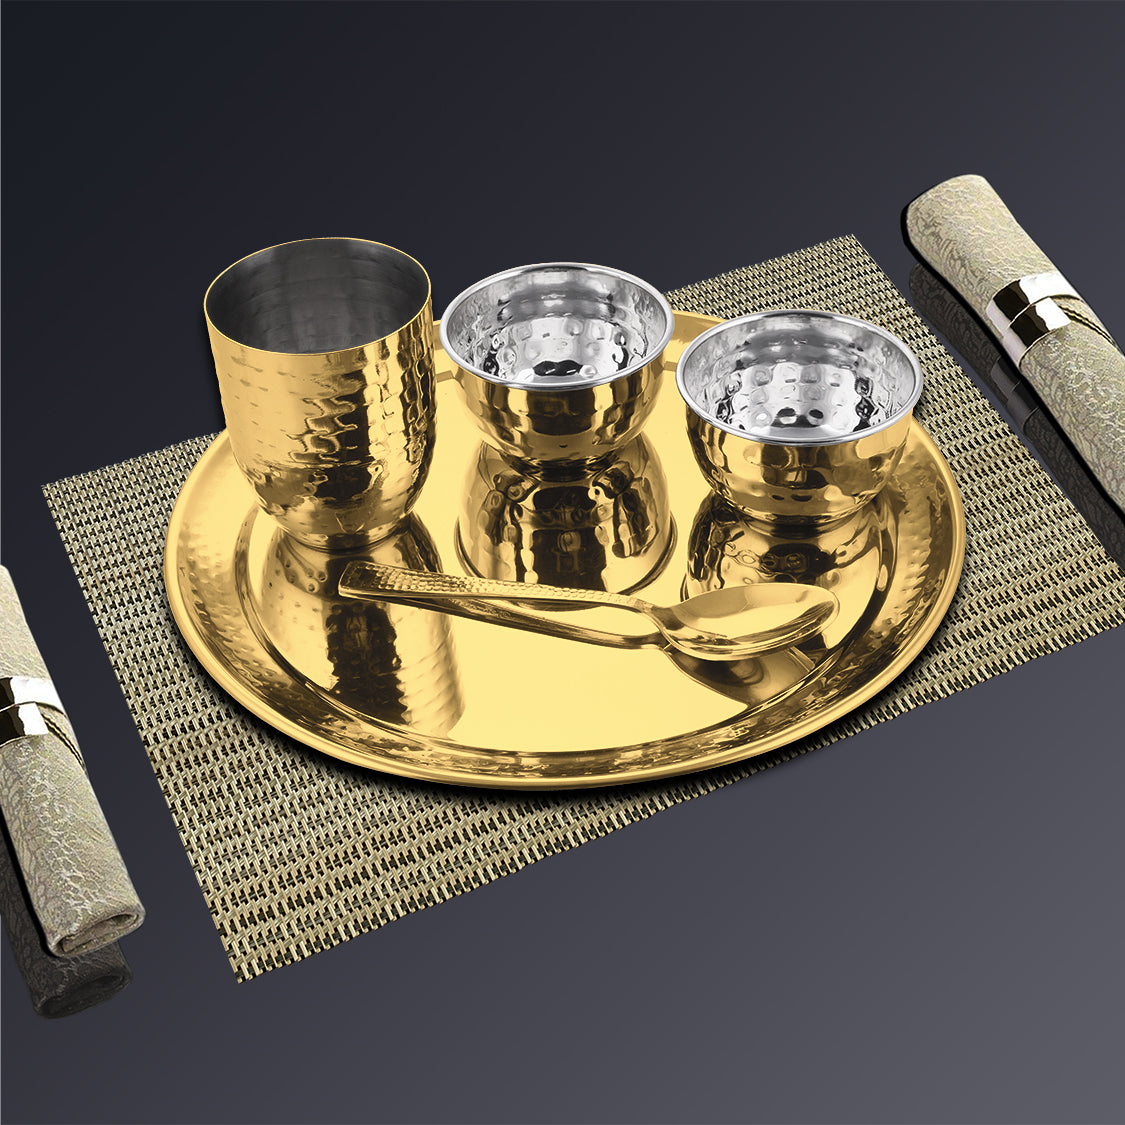 Stainless Steel Hammered Thali Set with Gold PVD Coating Diamond